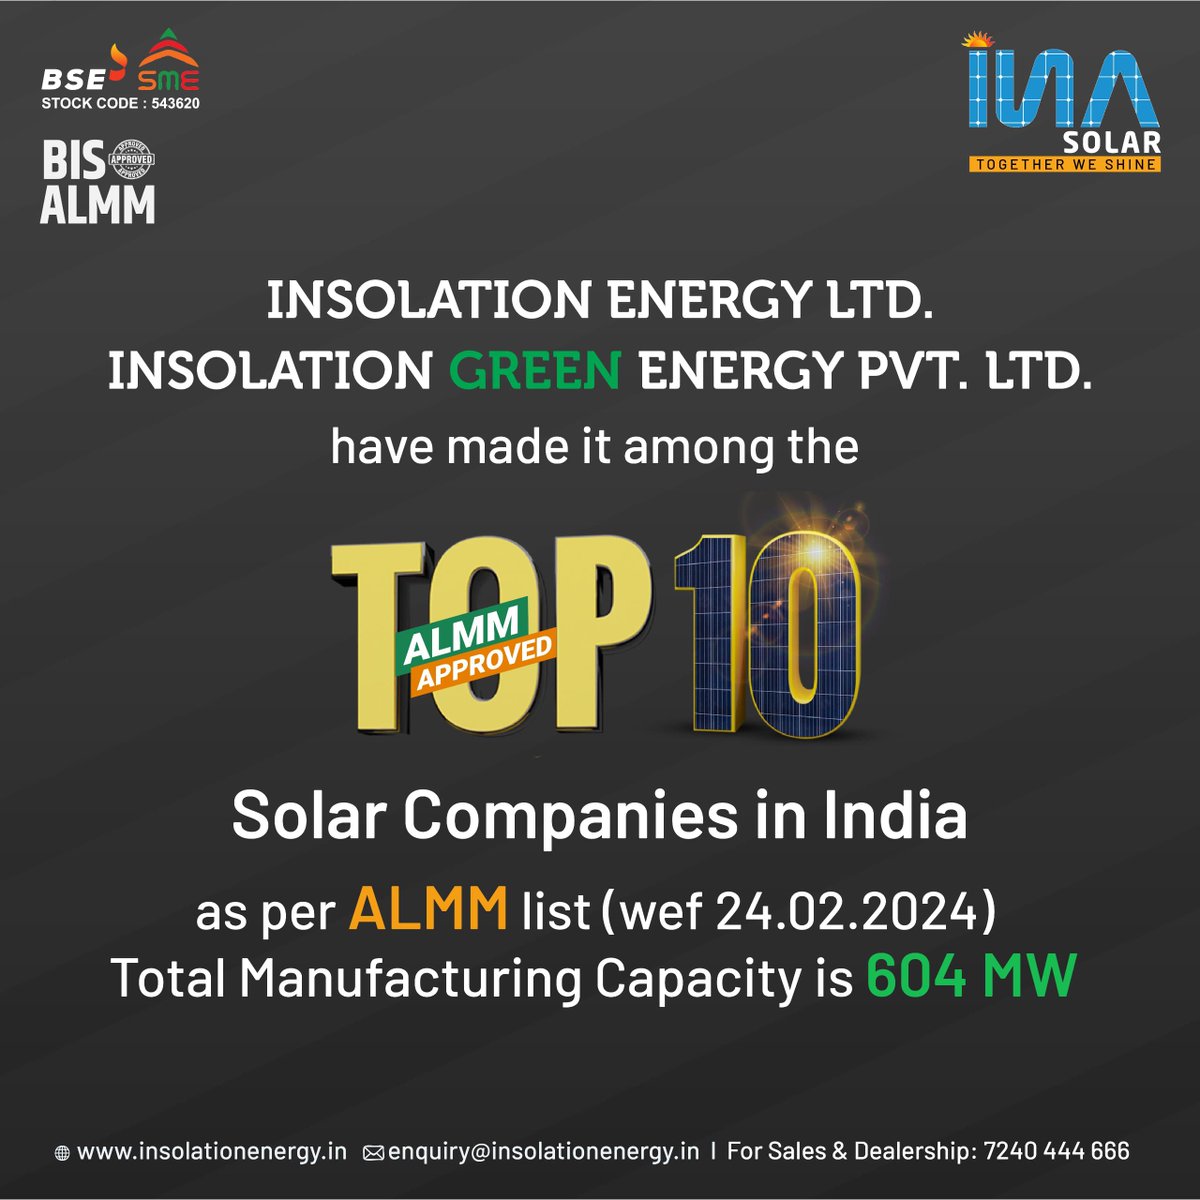 We are 'Over the Sun' to have grabbed a spot among the 'Top 10 Solar Companies in India' as per the ALMM List (wef 24.02.2024).
Insolation Energy Ltd.
#InsolationEnergy #INASolar #almm #TogetherWeShine #topsolarcompany #solarenergy #renewables #renewableenergy #renewablemirror